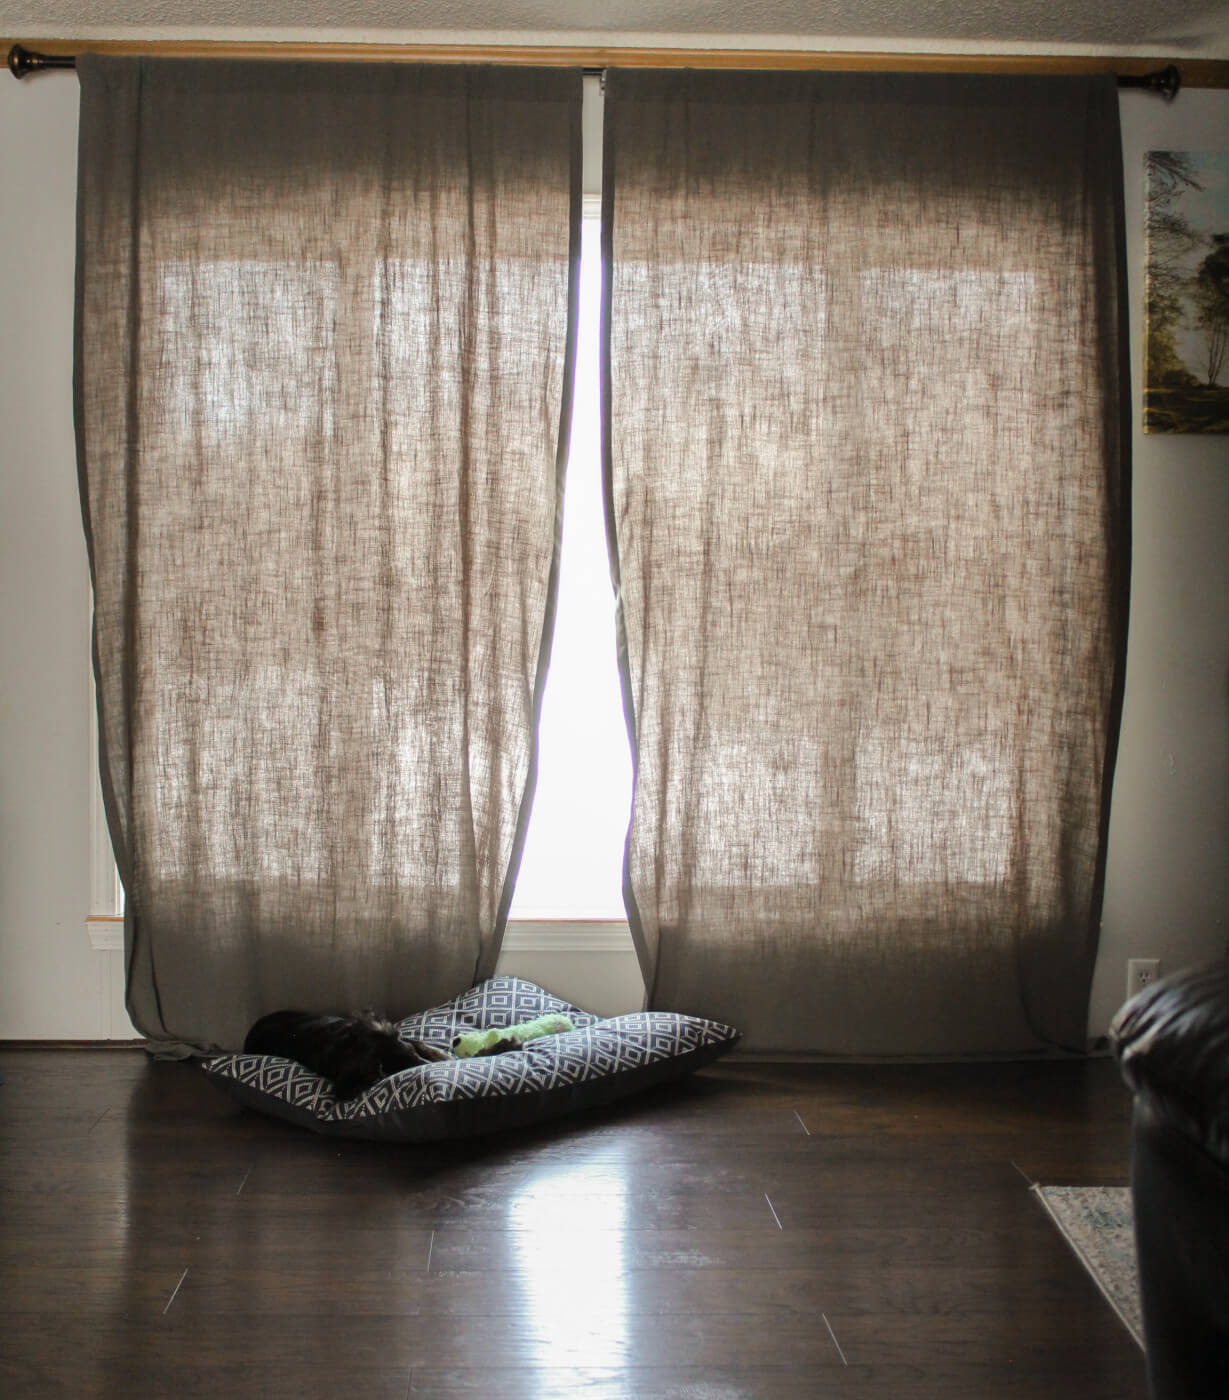 sewing curtains